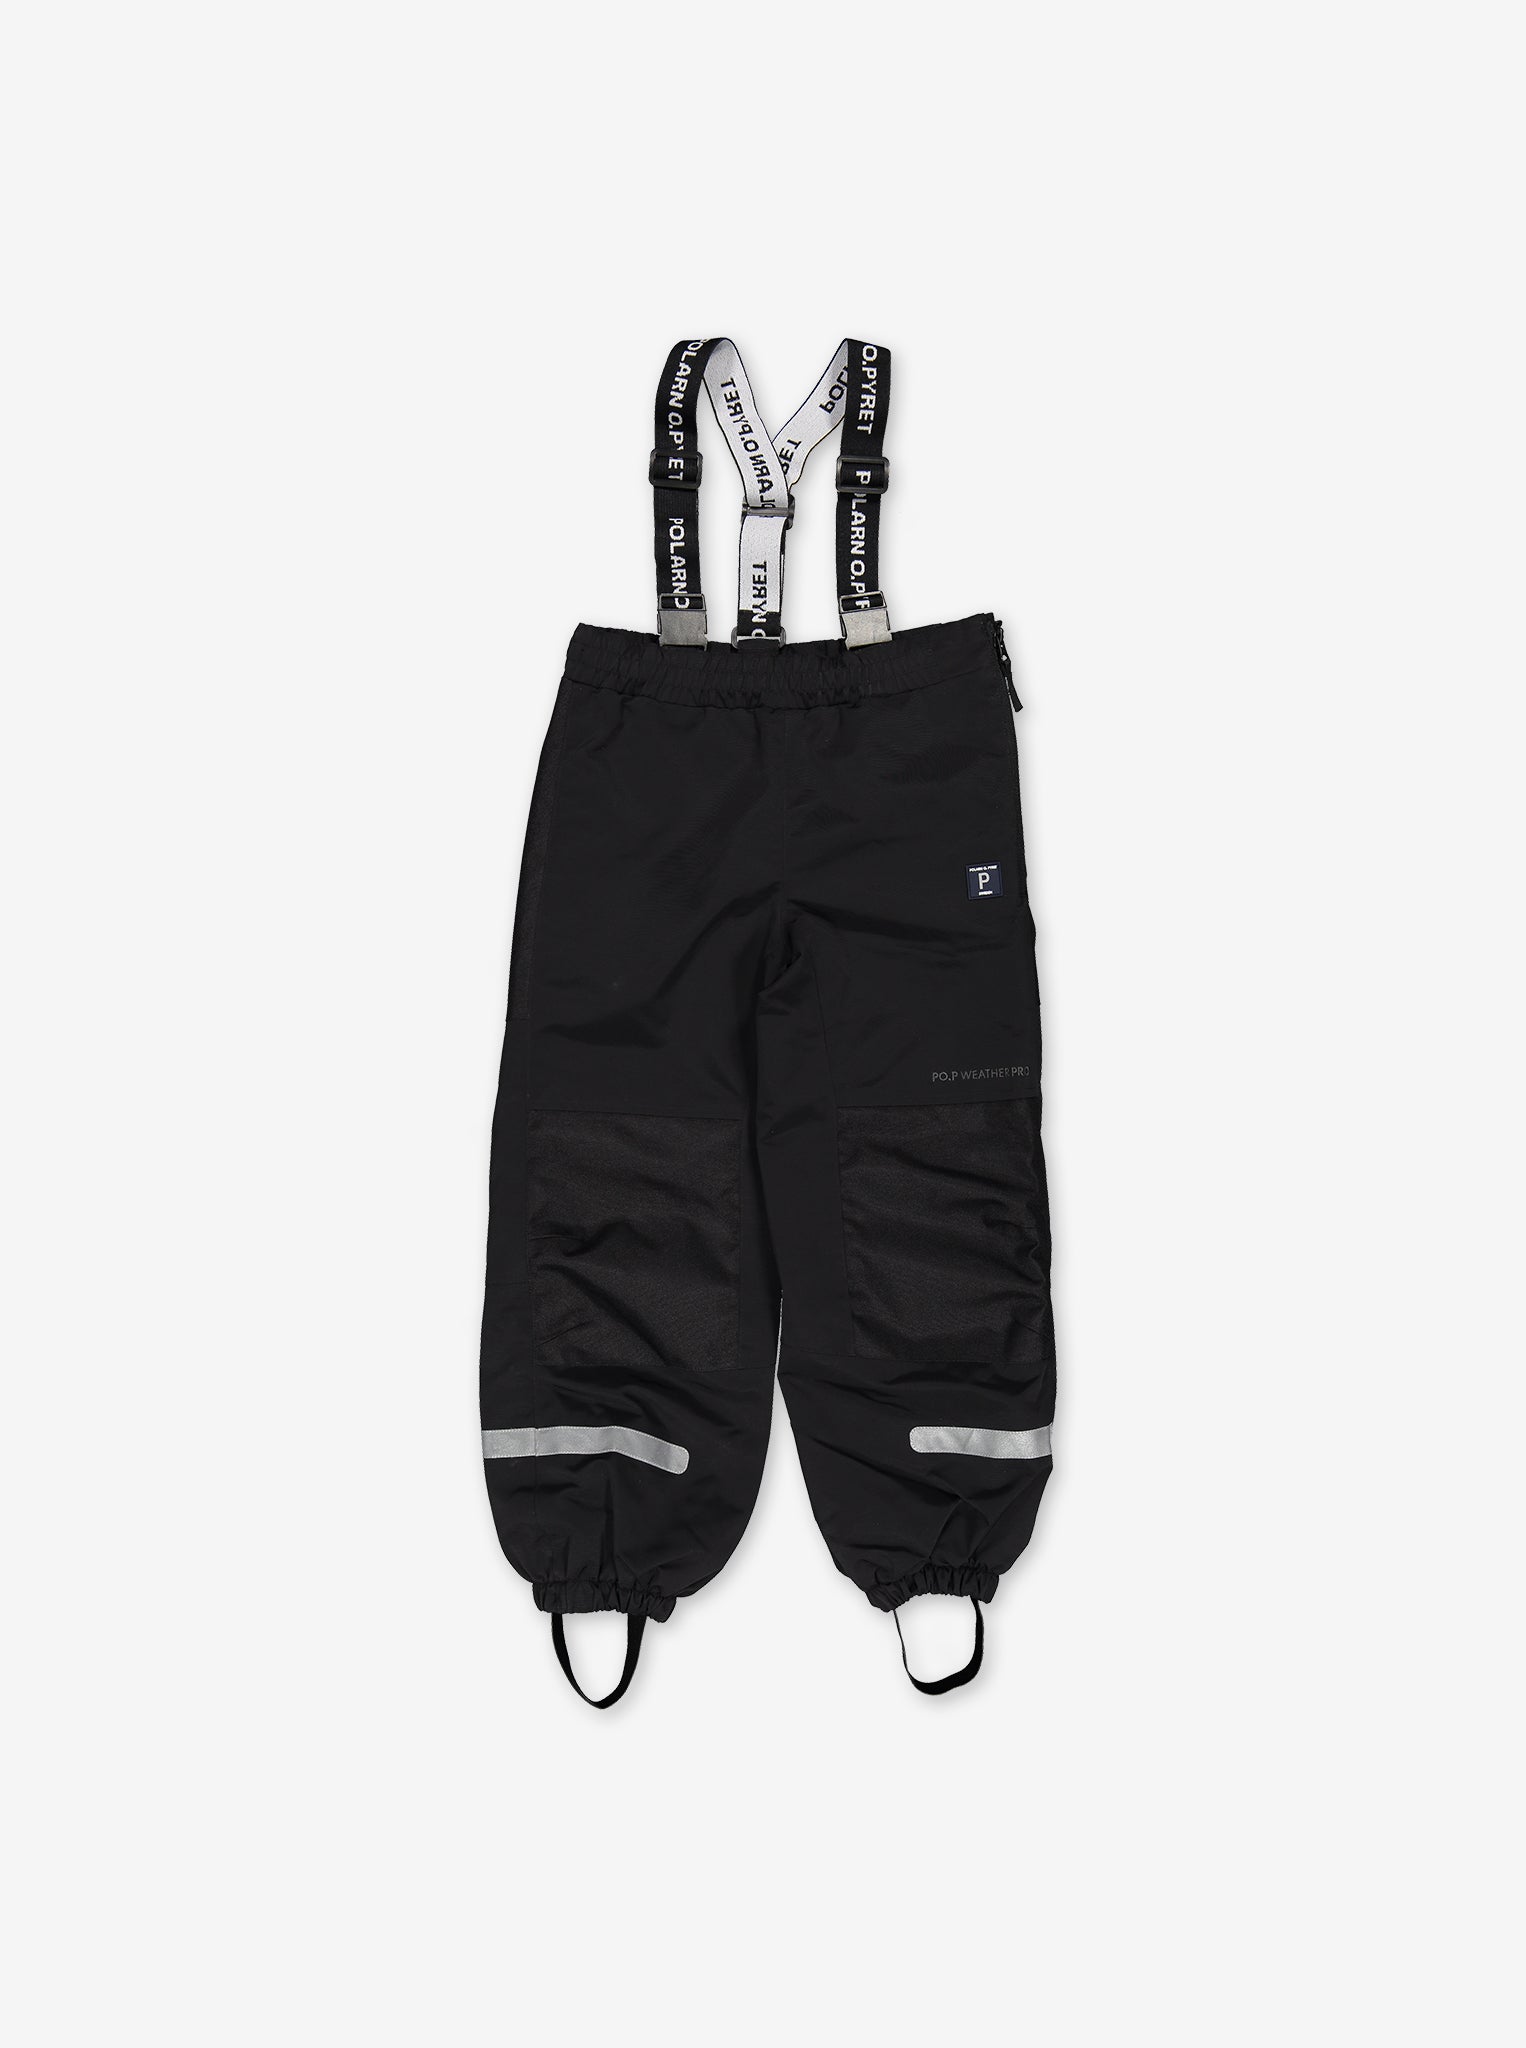 Kids Black Waterproof Trousers from the Polarn O. Pyret kidswear collection. The best ethical kids outerwear.